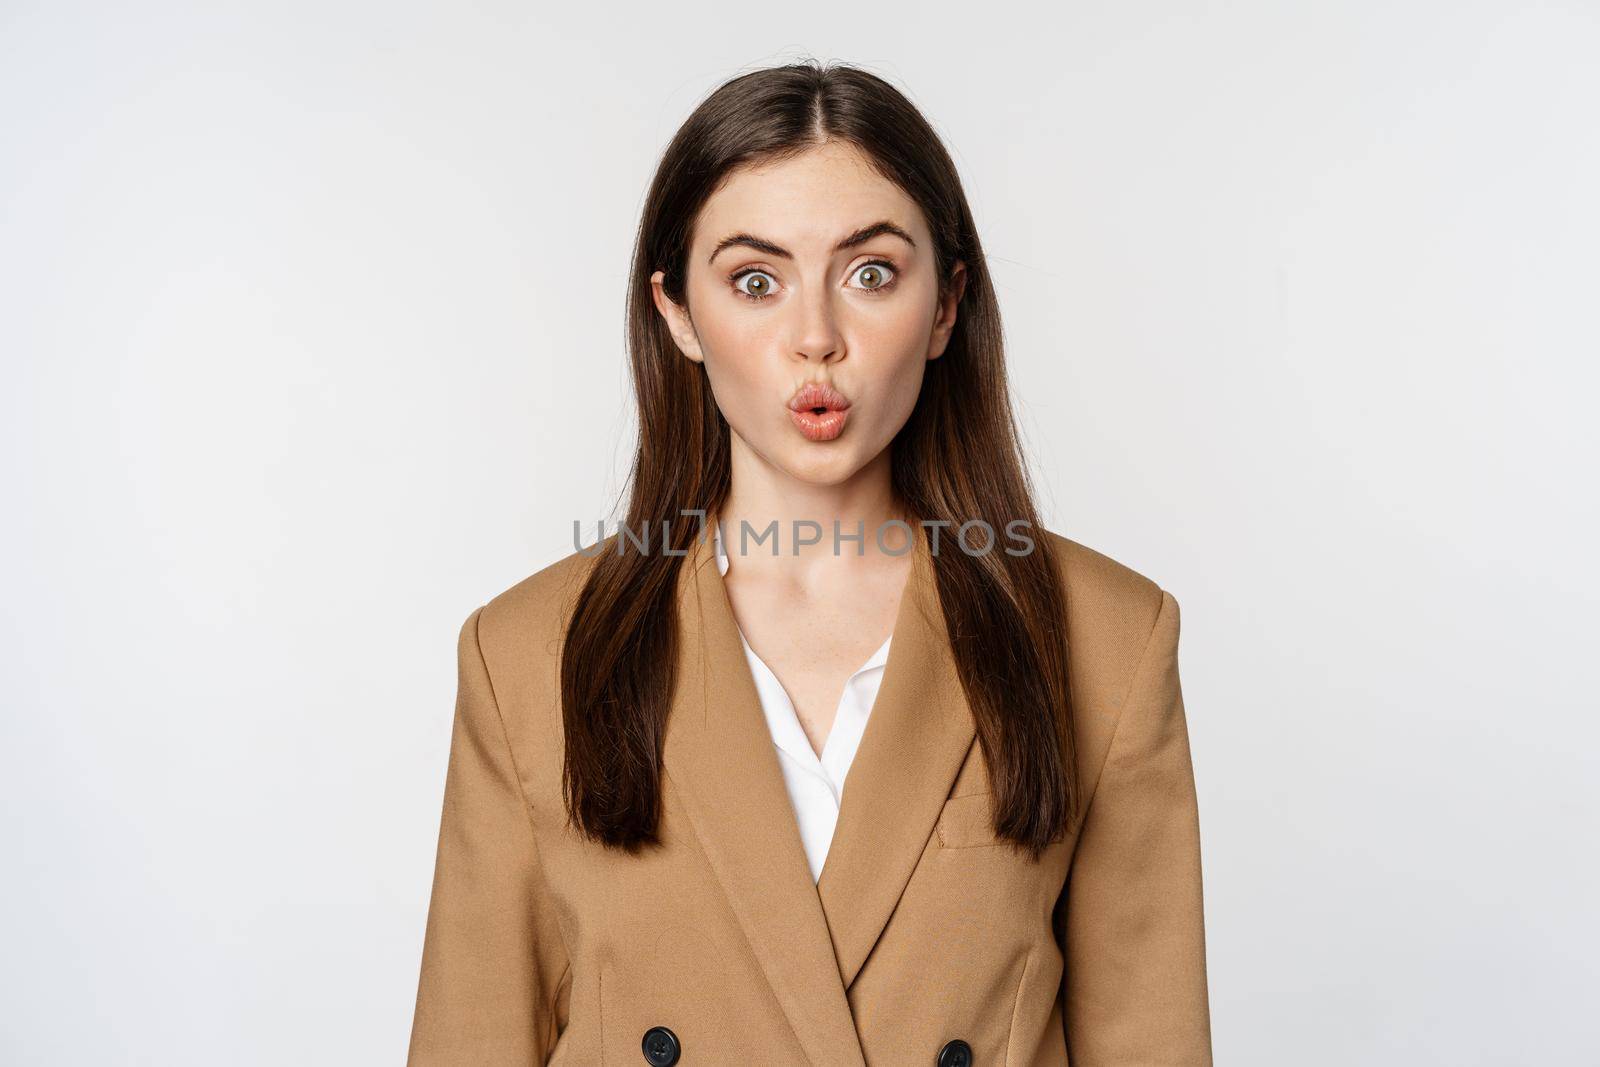 Portrait of office lady at workplace, looking surprised and curious, wow face, standing over white background in brown suit.